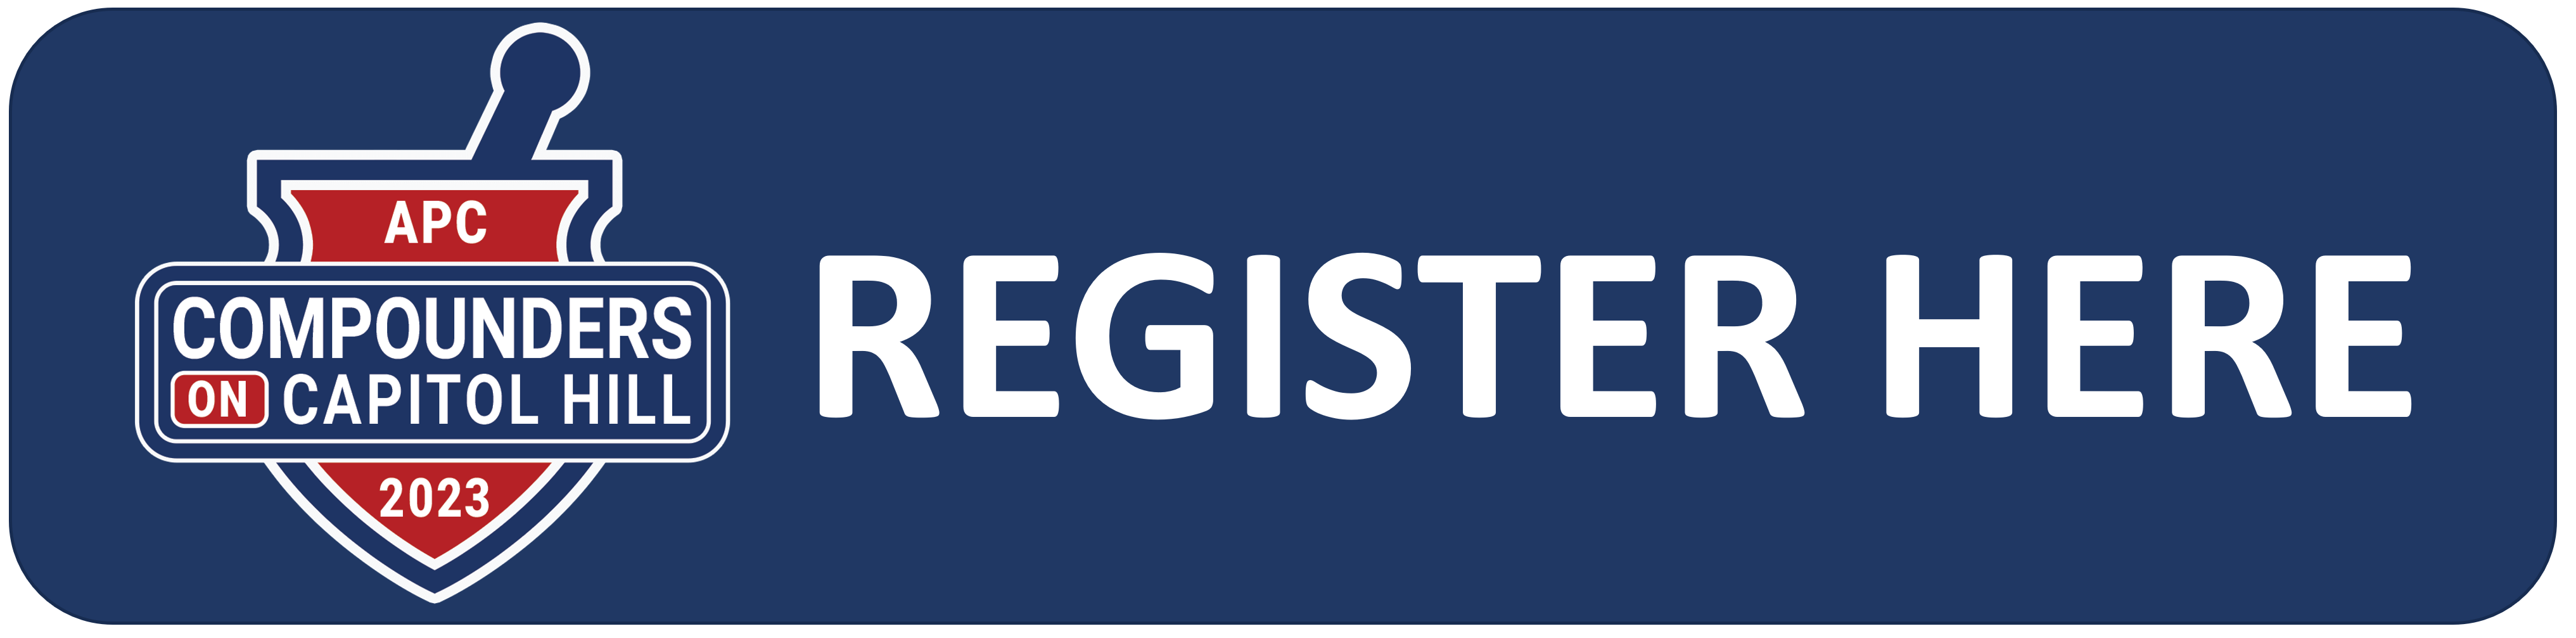 Register-here-CCH2023 image